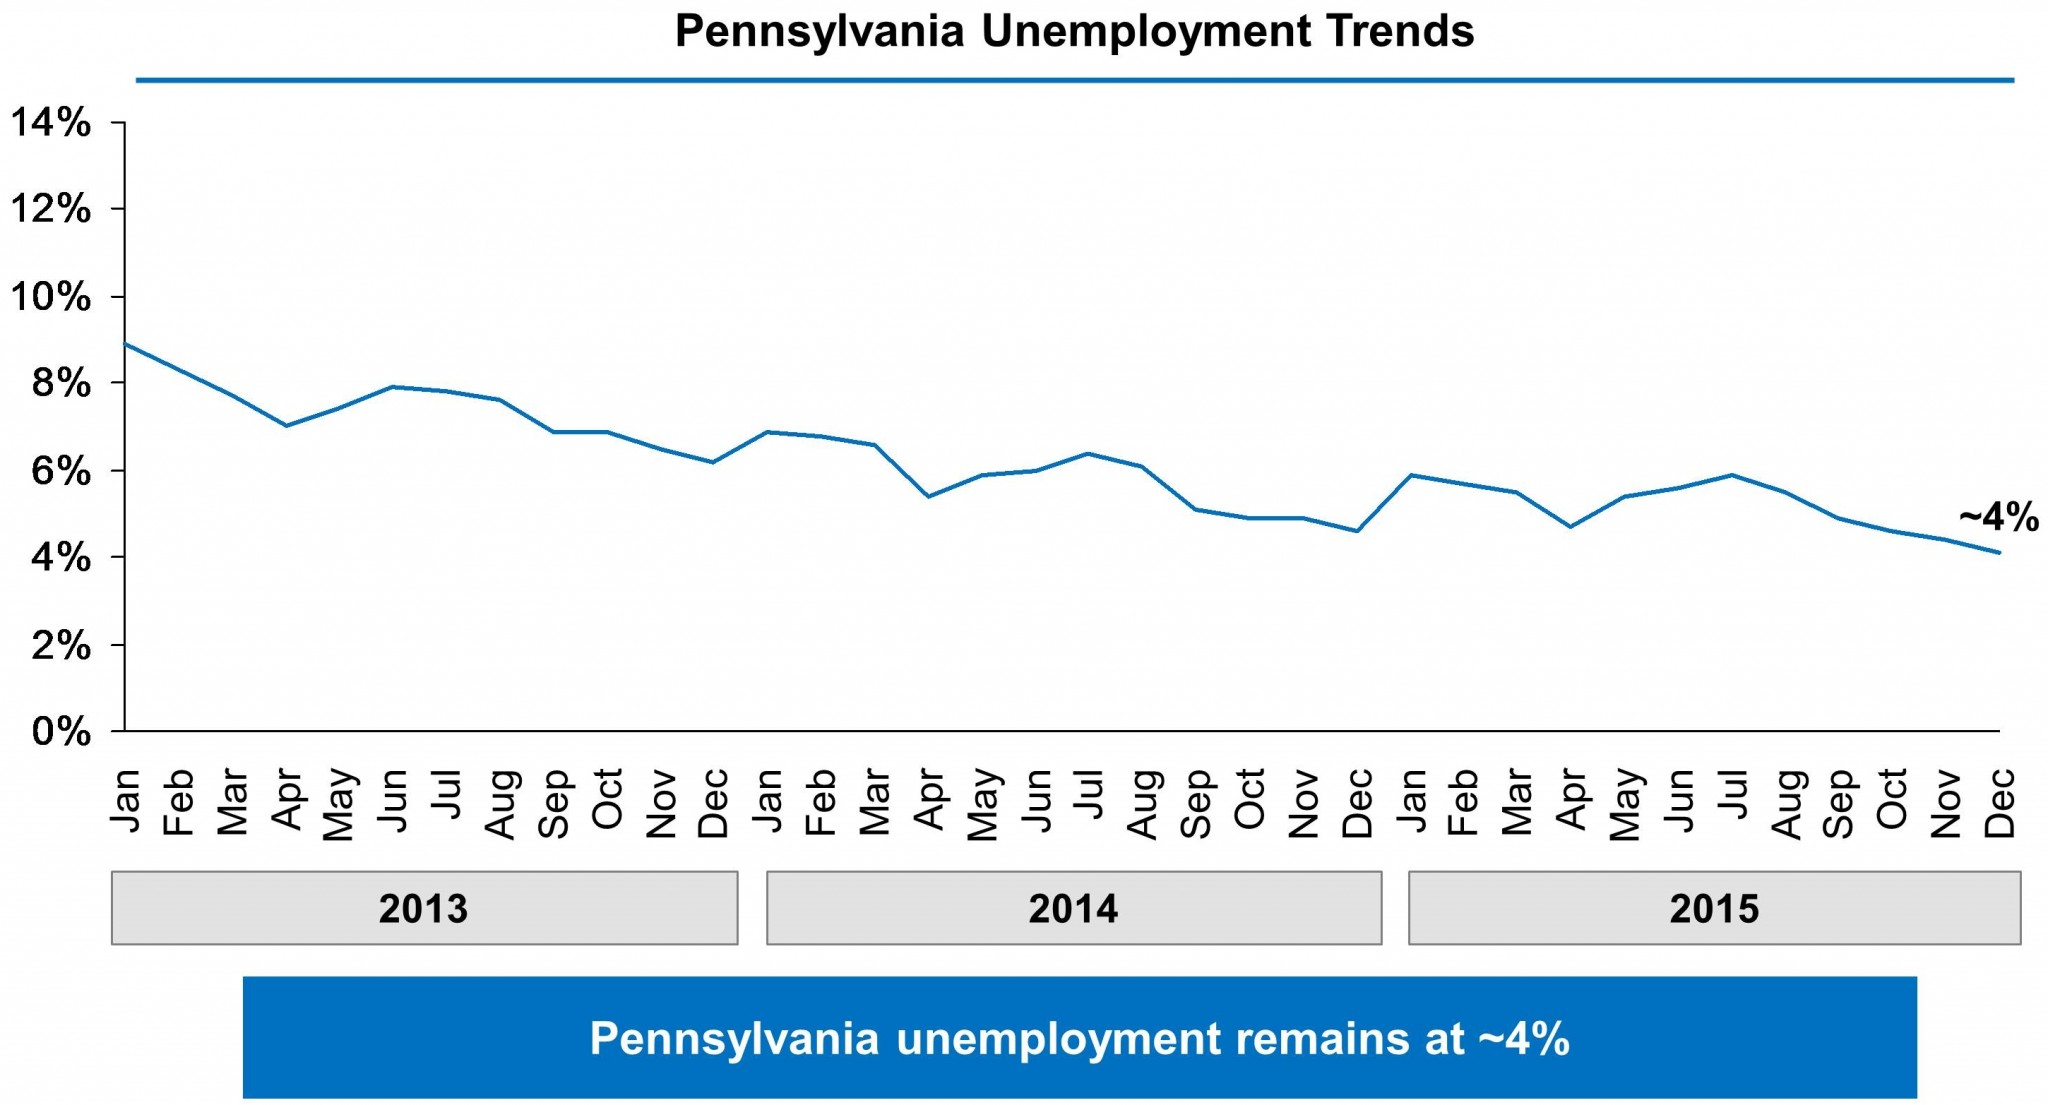 Chart showing Pennsylvania’s unemployment rate falling from 9% in January 2013 to 4.1% in December 2015.